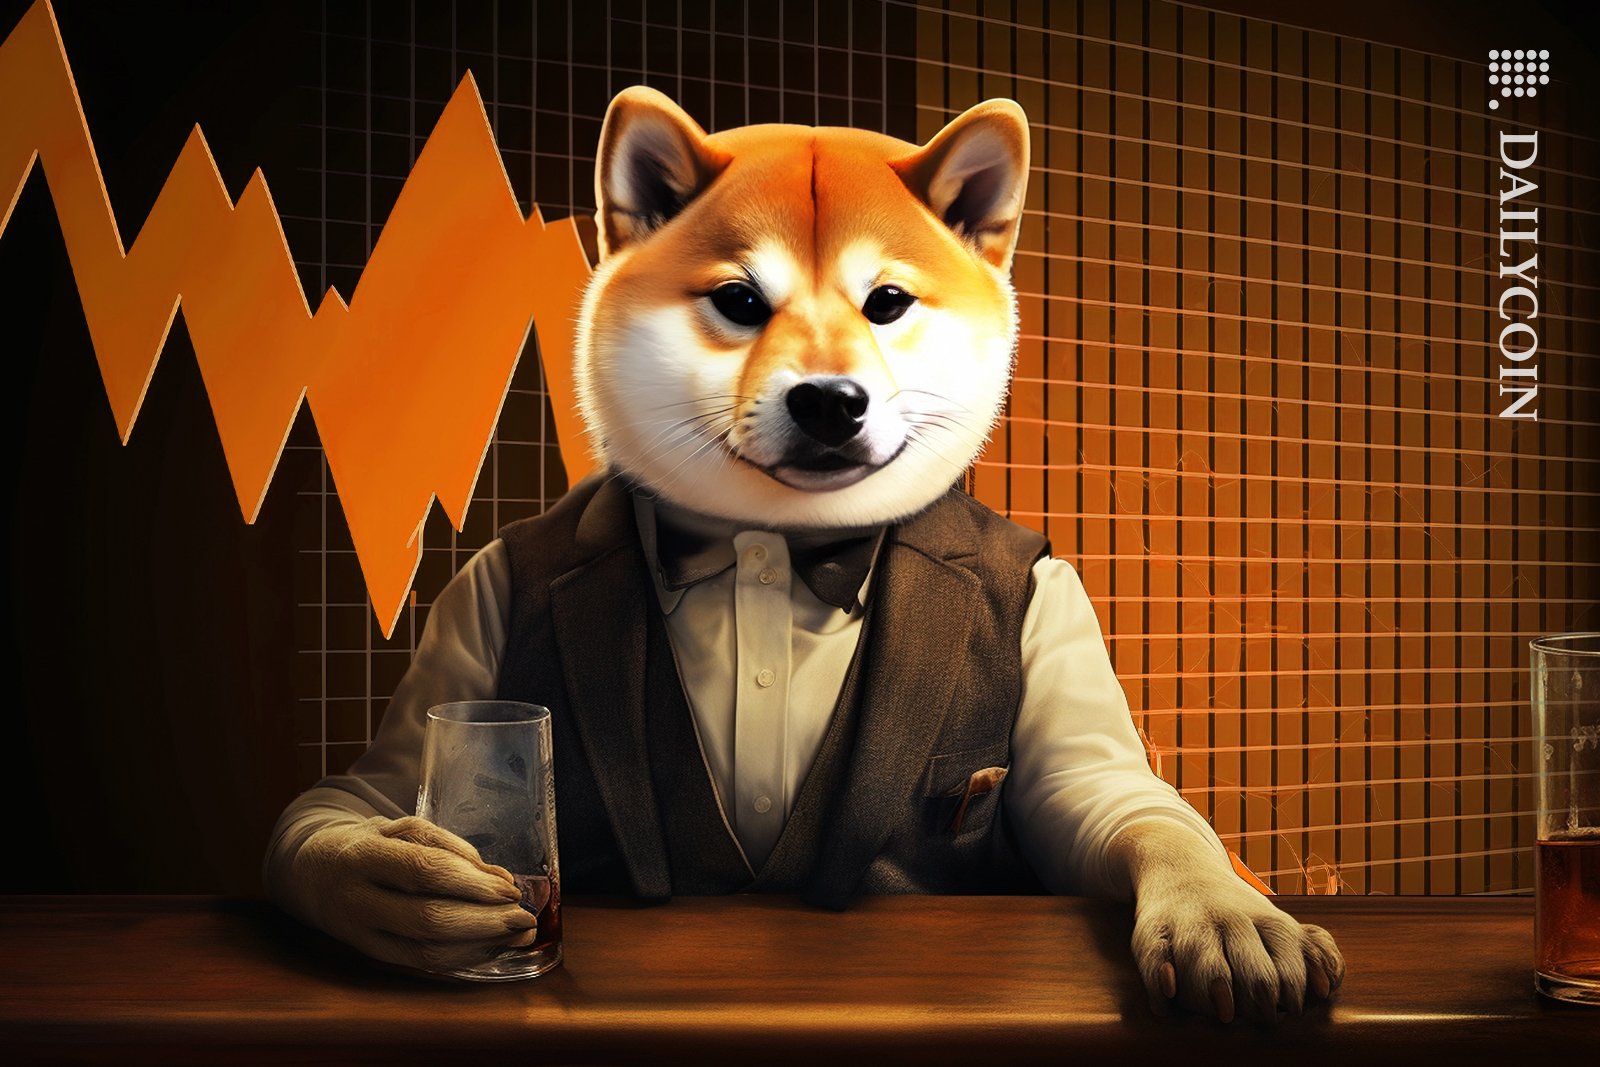 Shiba inu in the bar waiting on some positive news.